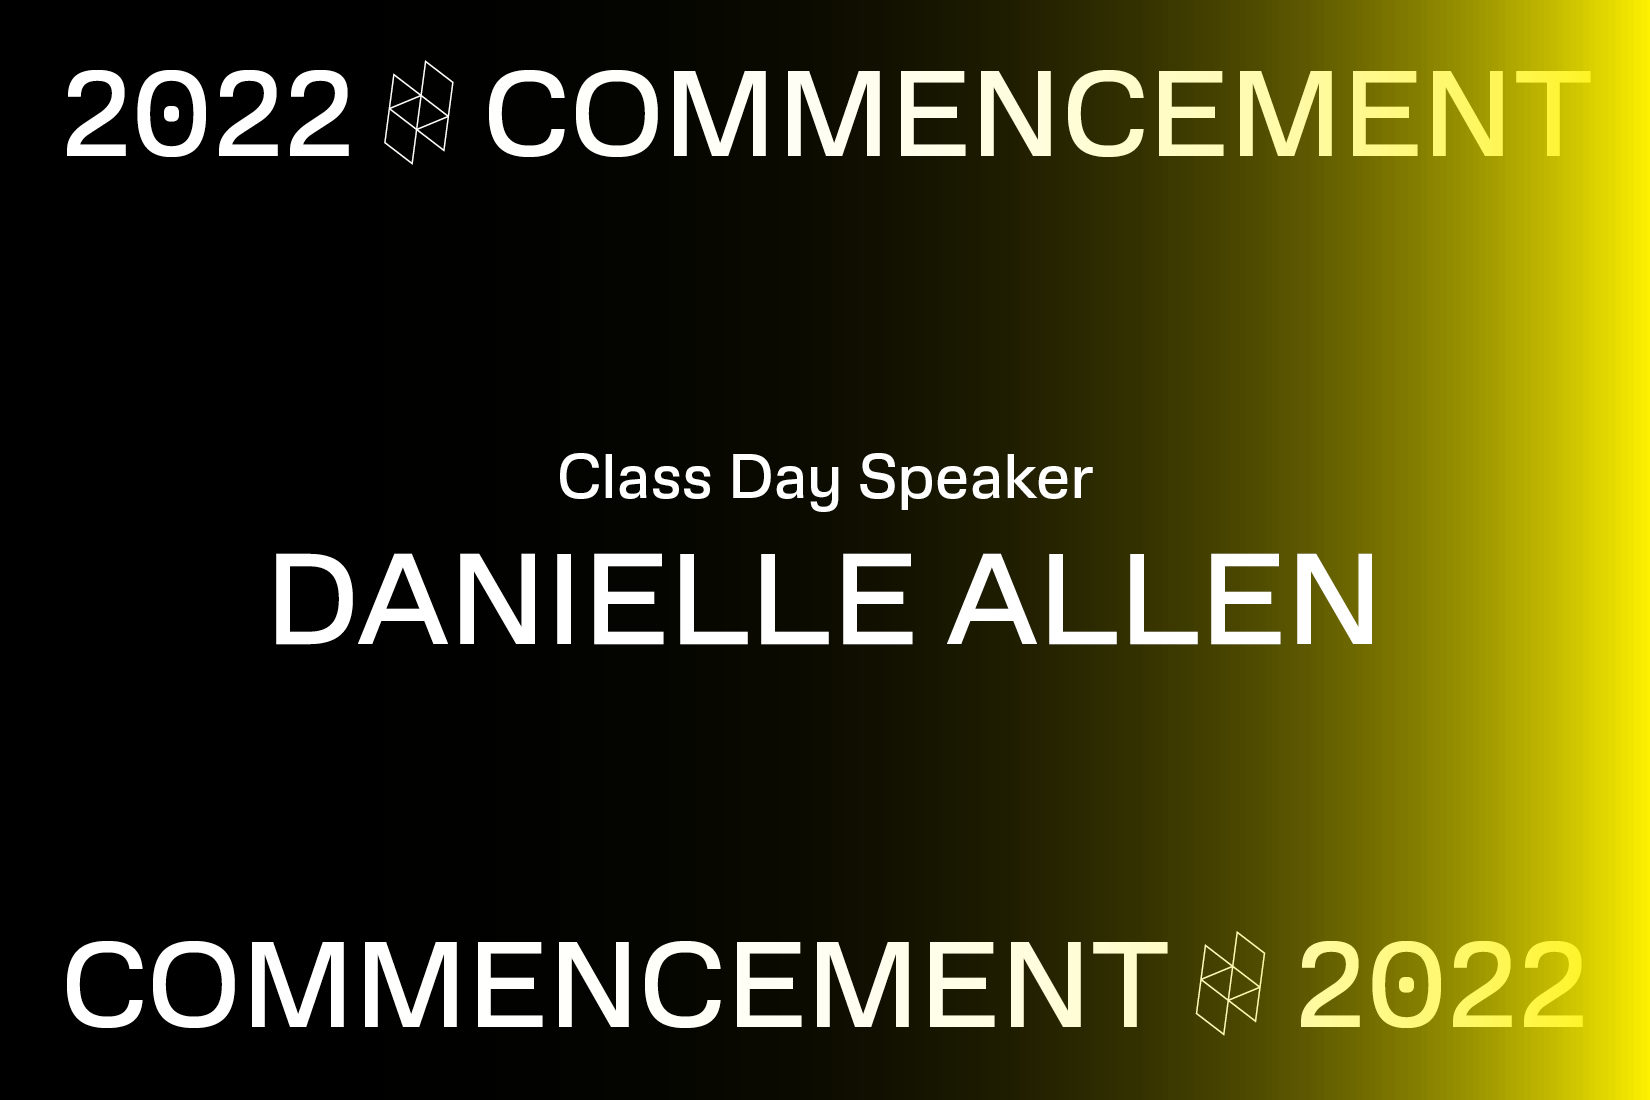 Black and yellow image with white text advertising the 2022 Class Day Speaker, Danielle Allen.